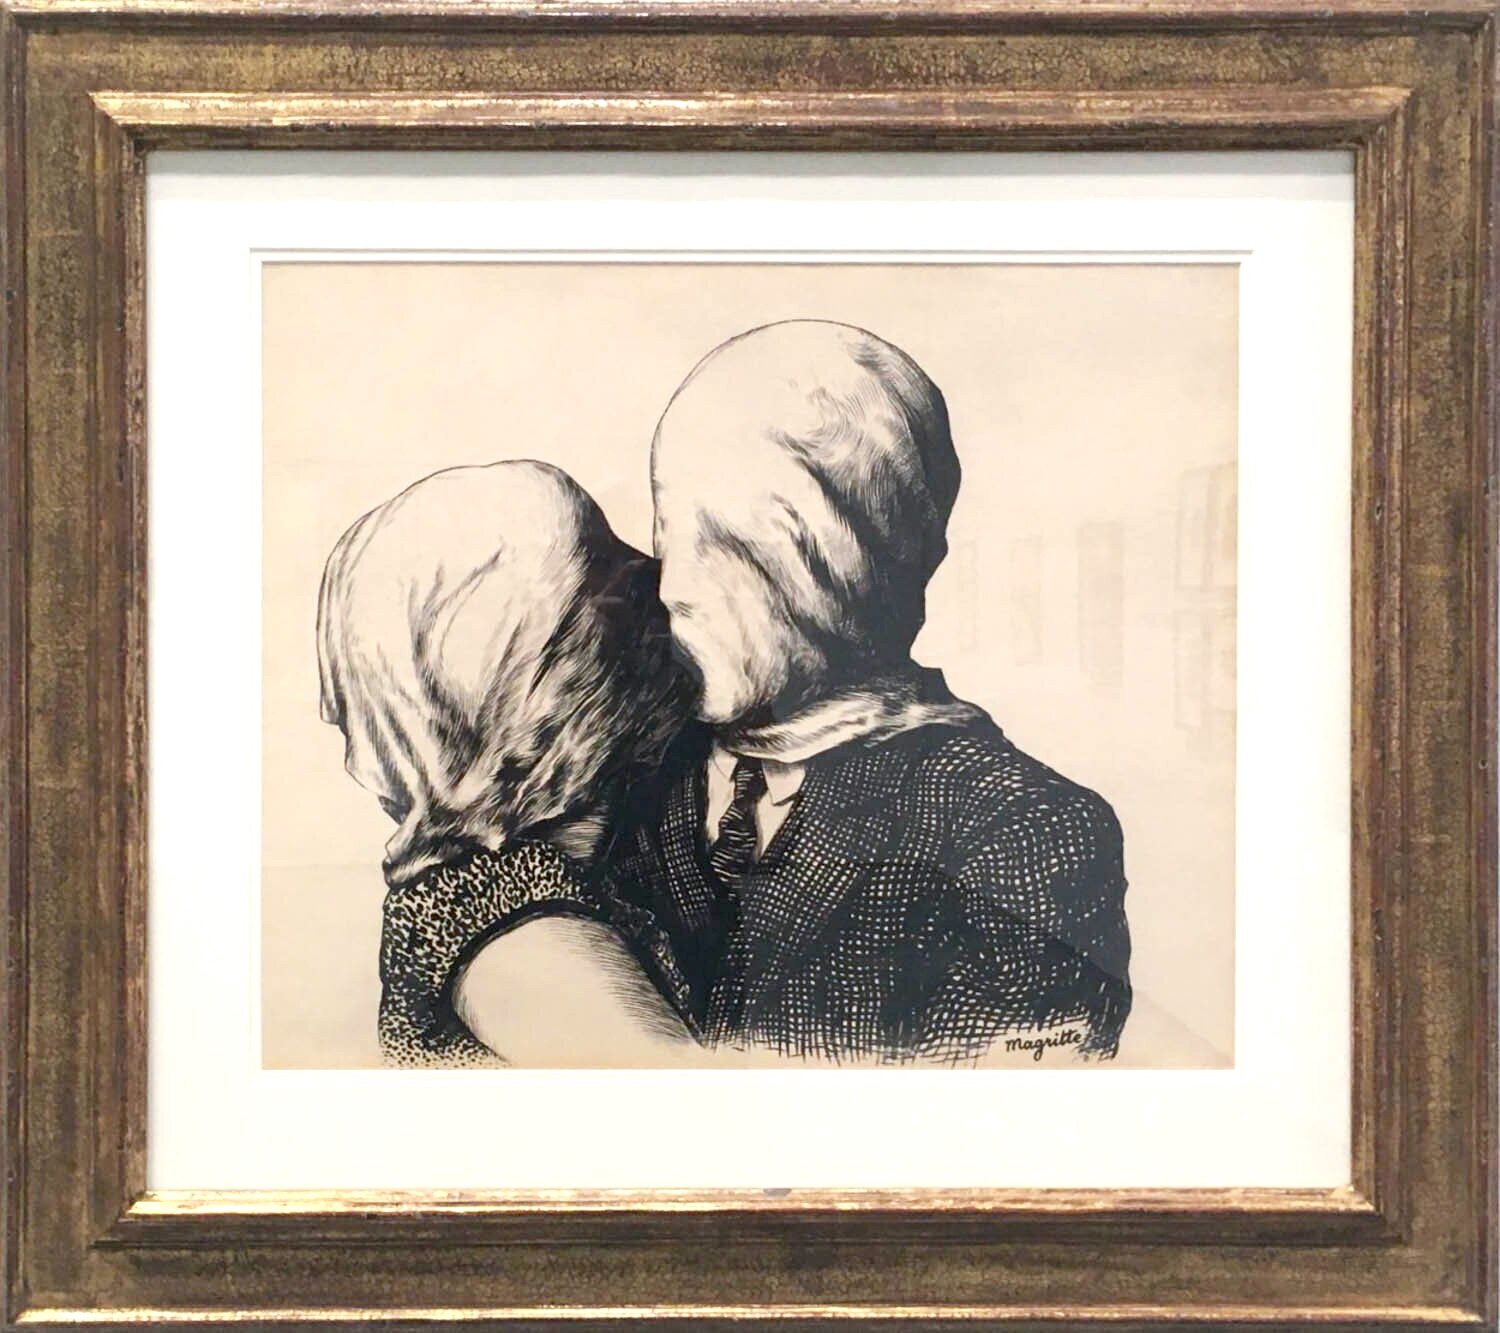  On the adjacent wall is Duo, by René Magritte, 1928. 